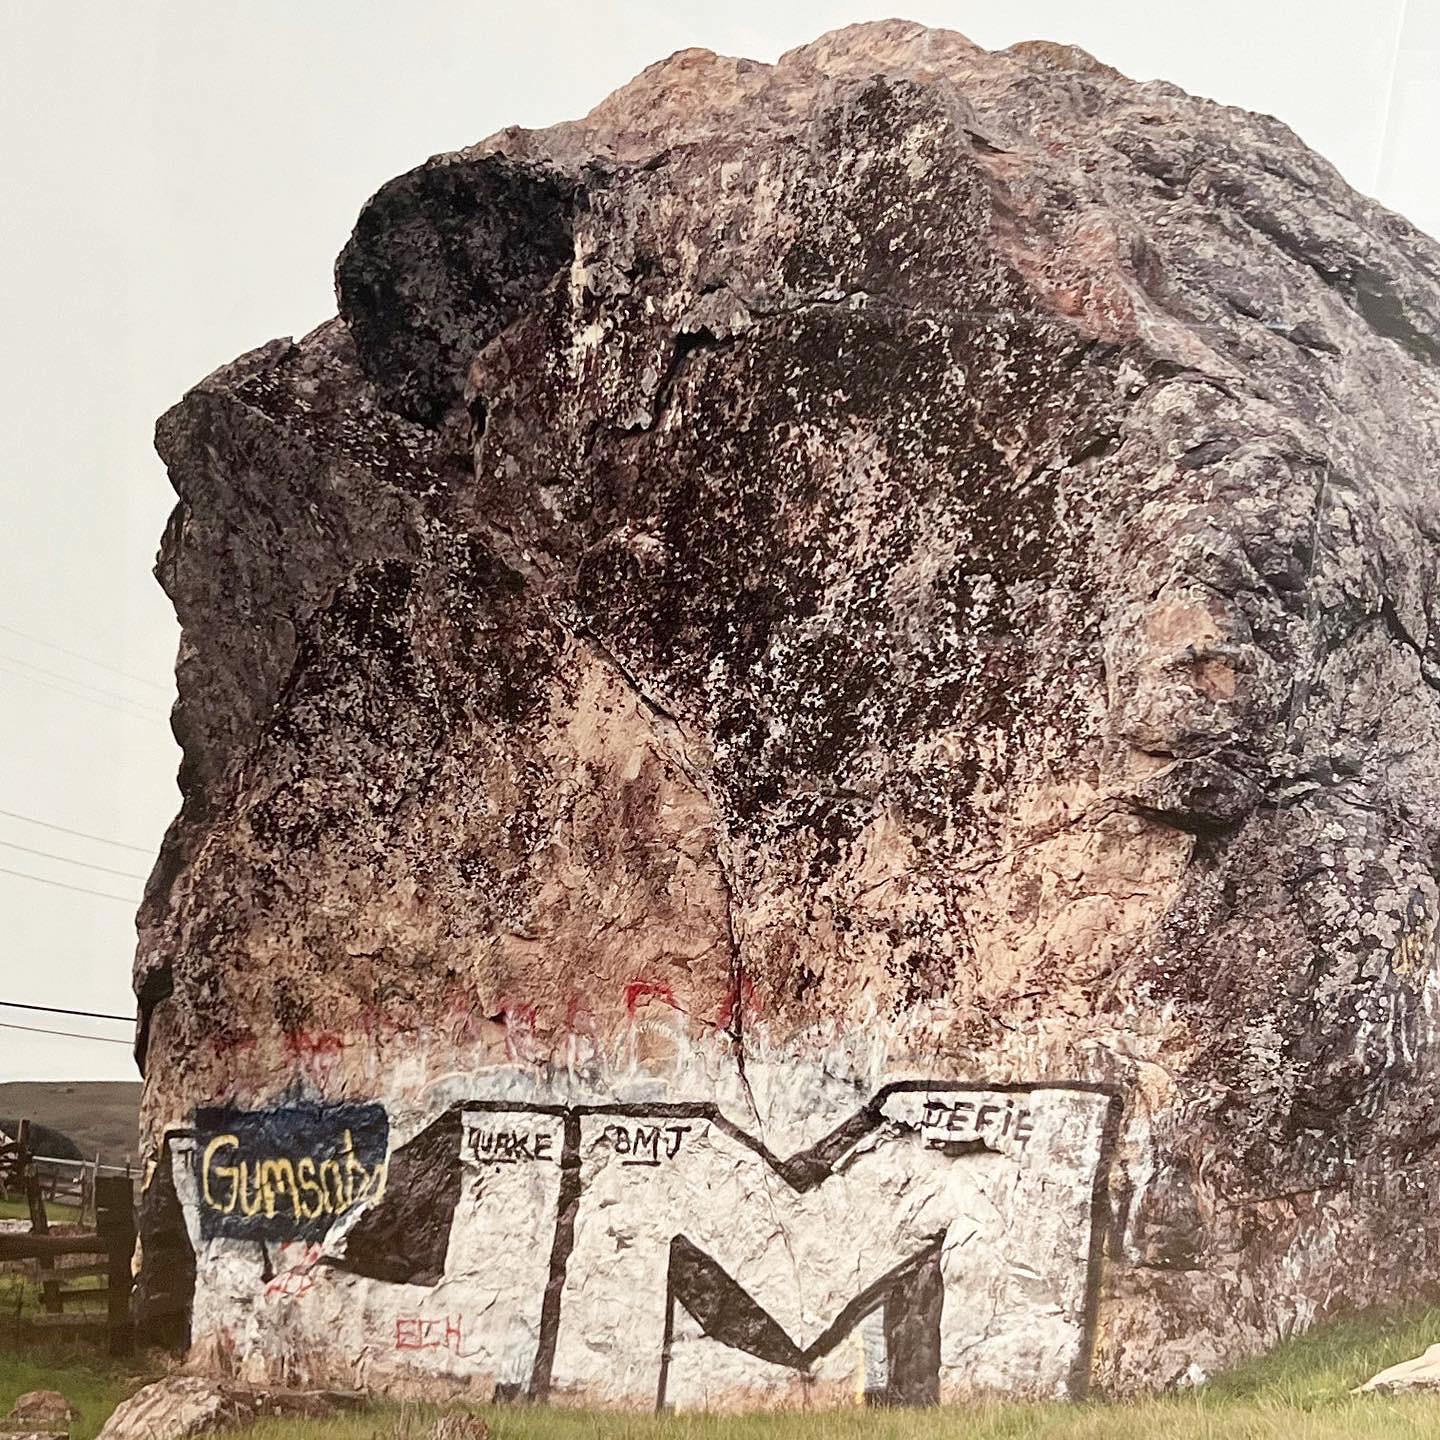 A large-format C-Print photograph by Mary Parisi, framed in ebonized wood, early aughts. A landscape depicting graffiti on an immense boulder. Immaculate condition and ready to hang. Pick up in LA or worldwide shipping